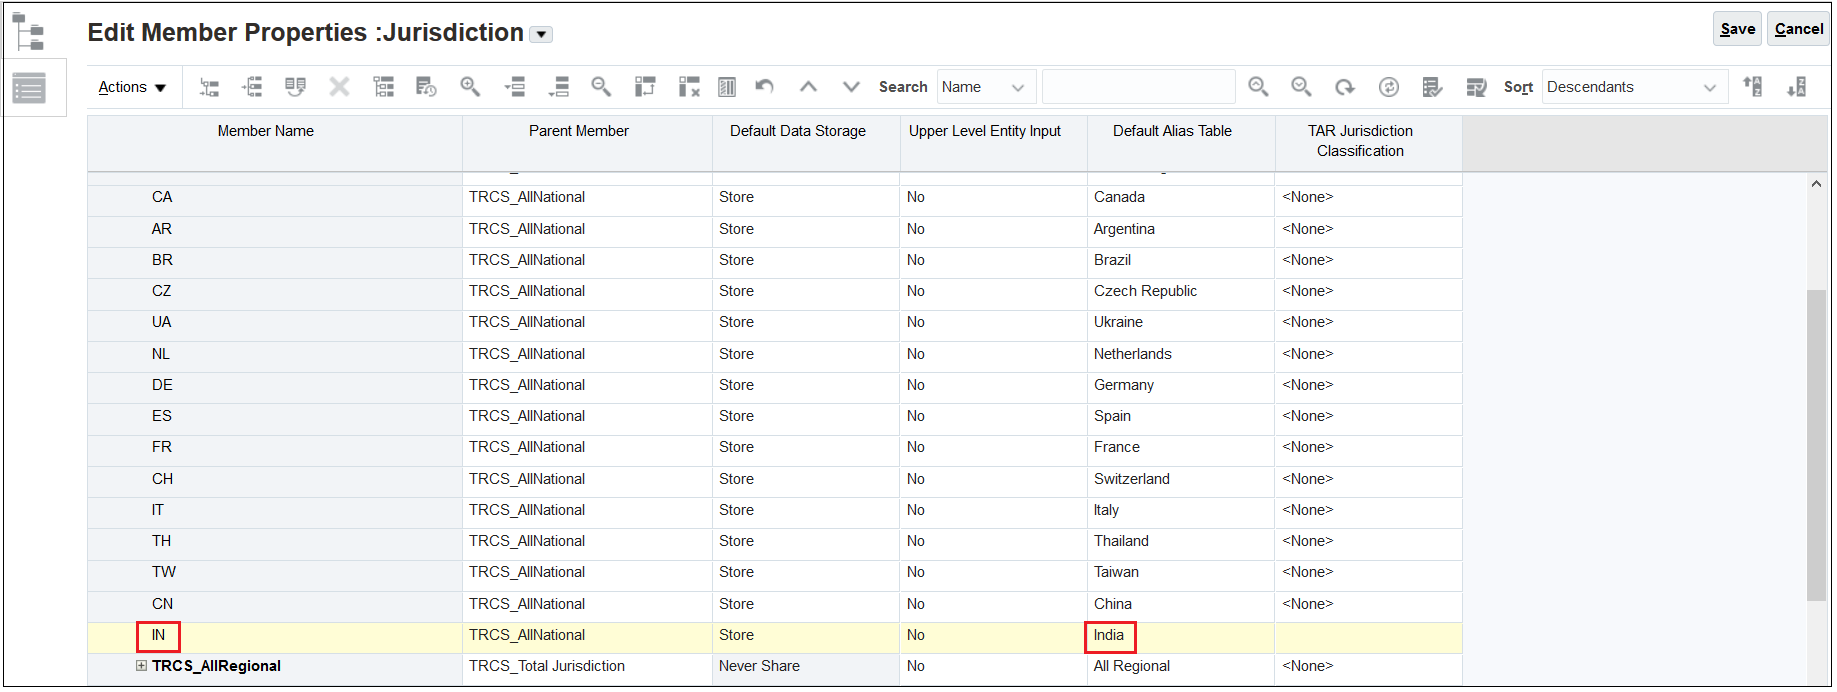 Jurisdiction screen with IN entered for the Member Name and India entered for the Default Table Alias